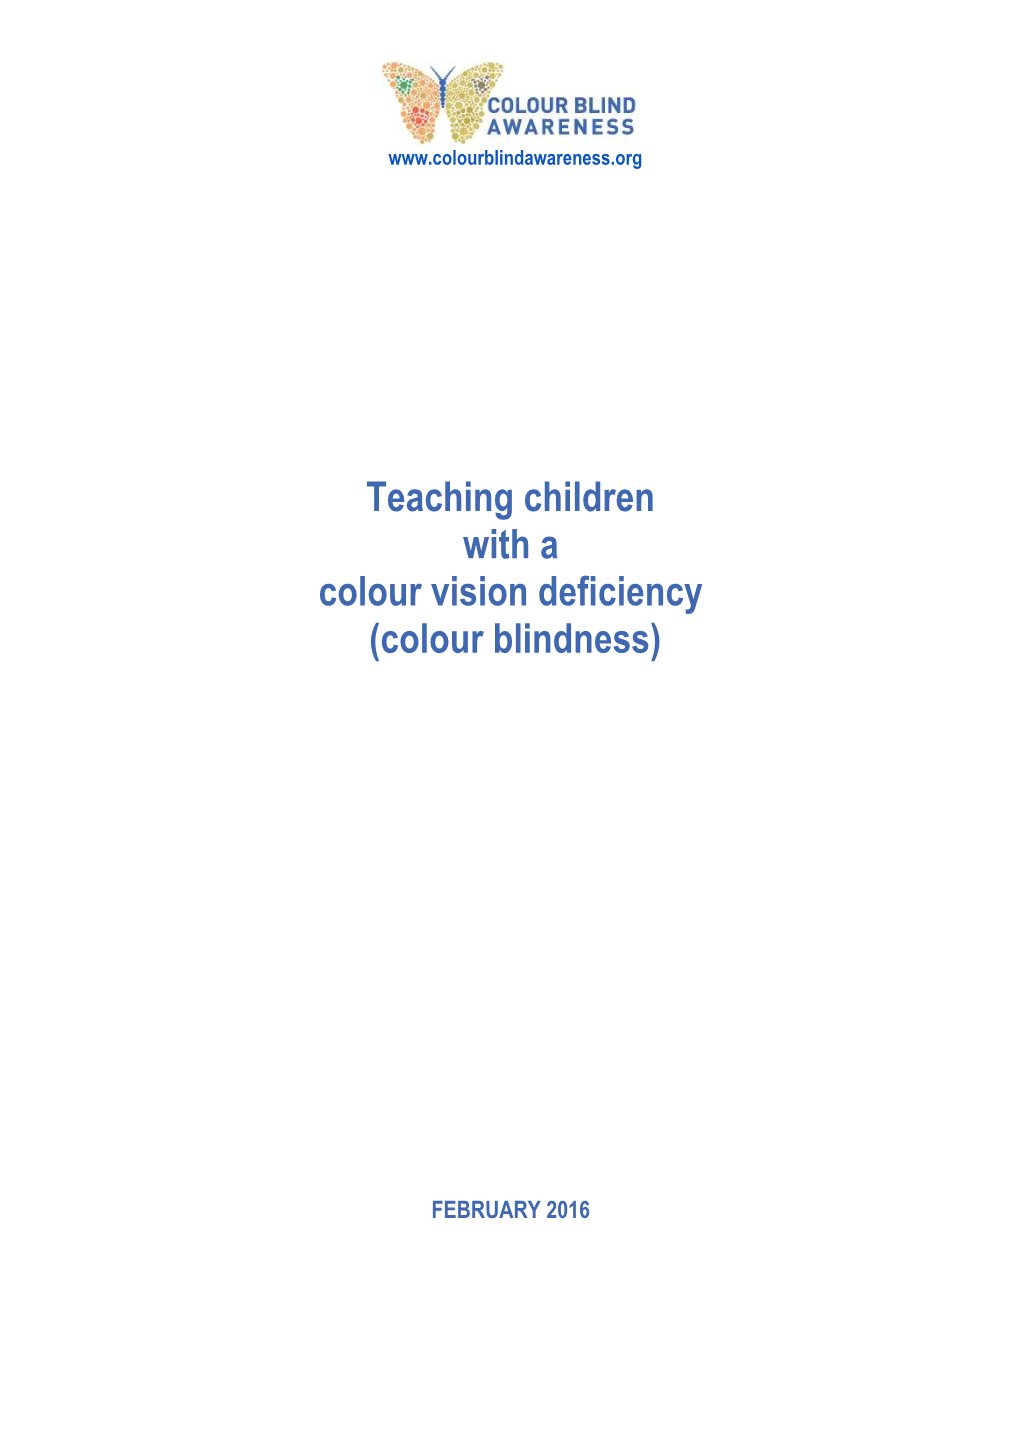 Teaching Children with a Colour Vision Deficiency (Colour Blindness)